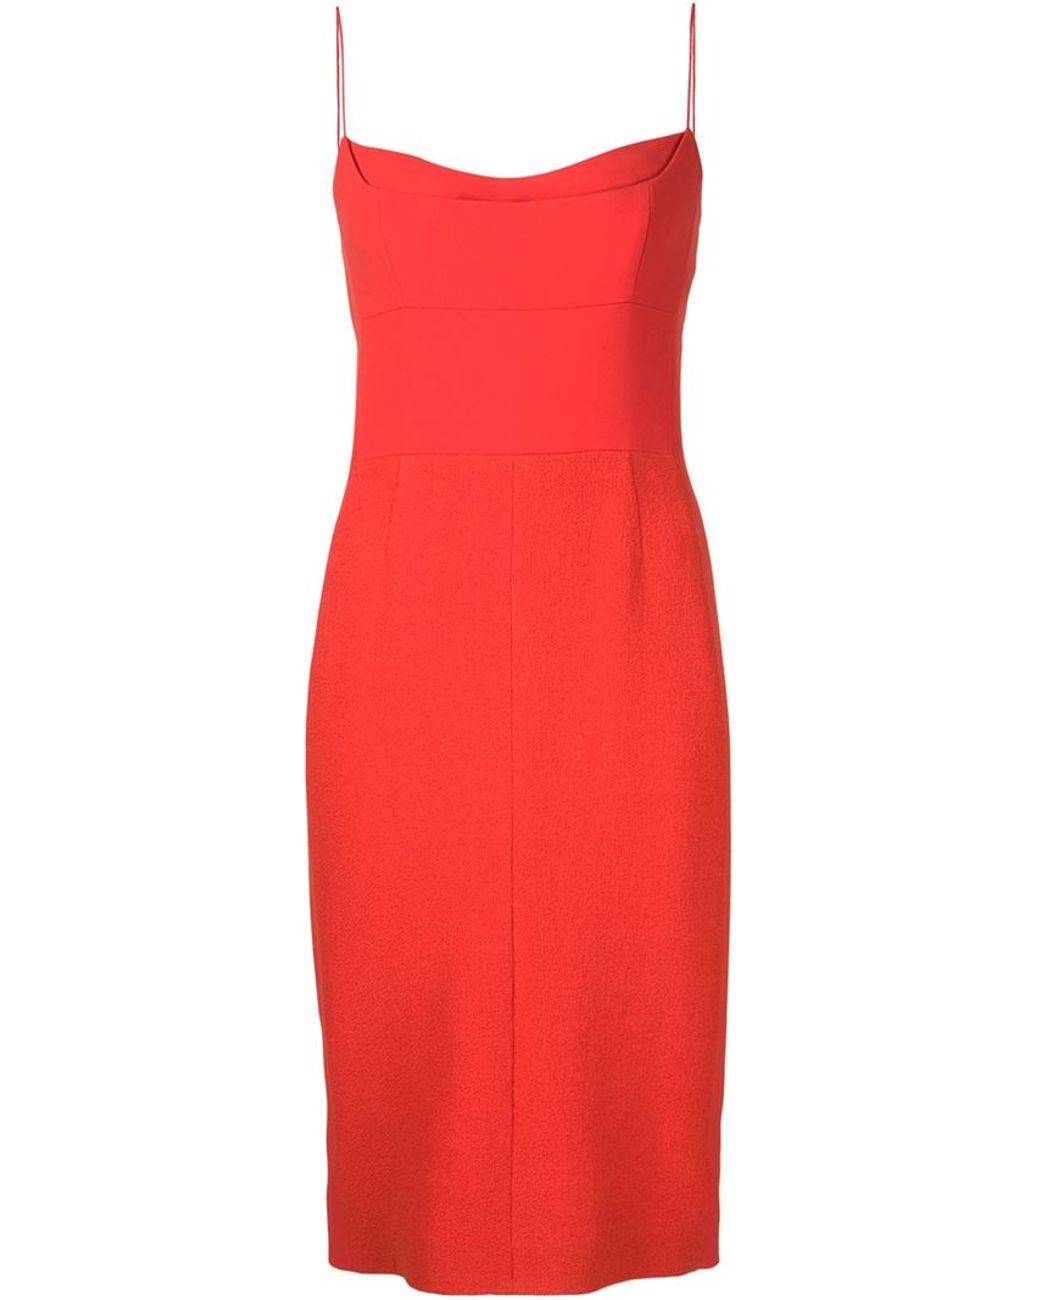 Narciso Rodriguez Spaghetti Strap Dress in Red | Lyst